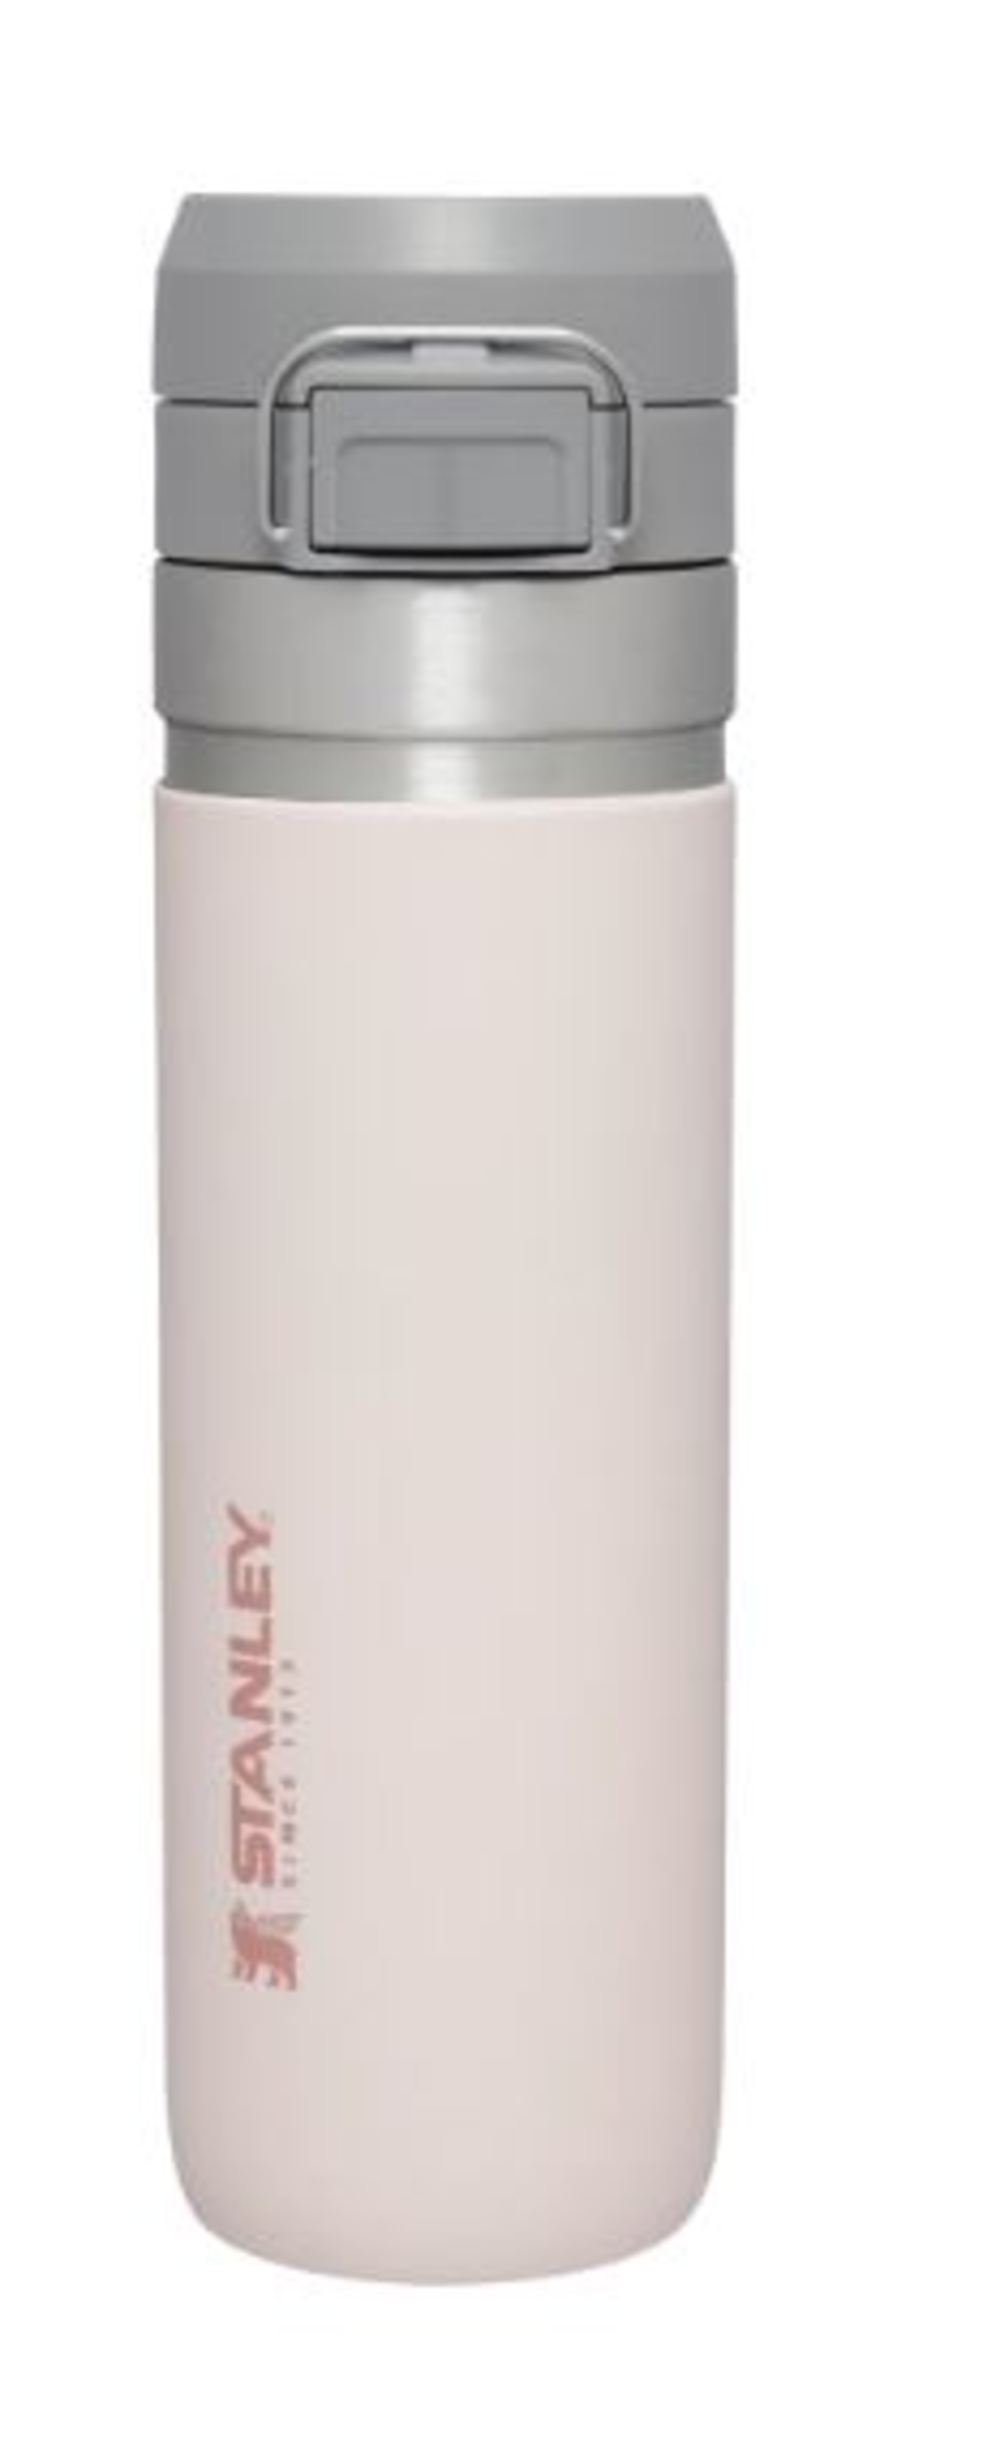 10-01959-024 Stanley 1.1-Quart Stainless Steel Insulated Water Bottle